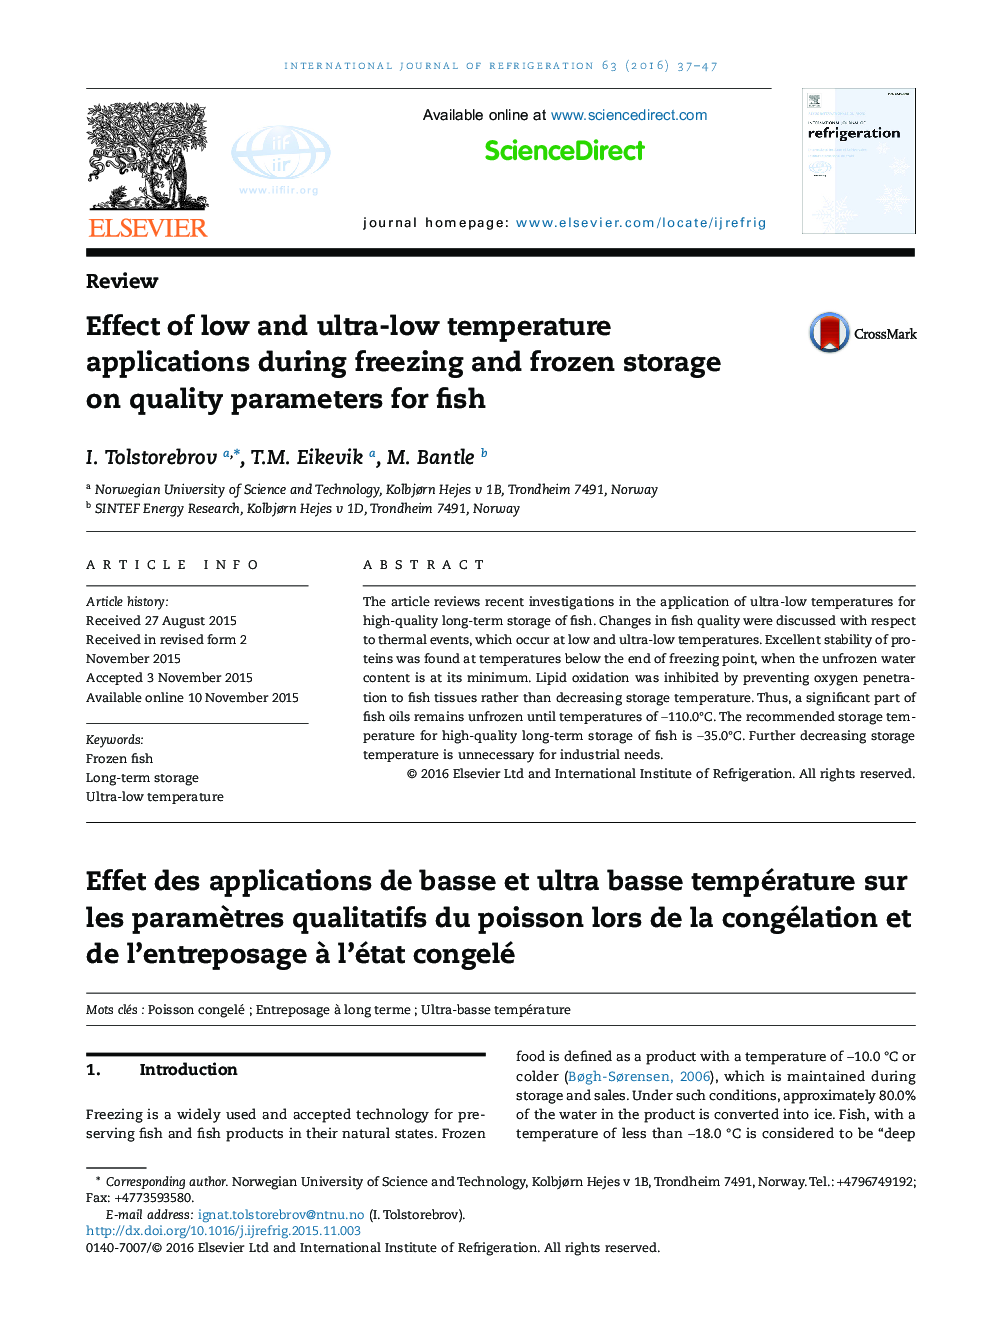 Effect of low and ultra-low temperature applications during freezing and frozen storage on quality parameters for fish